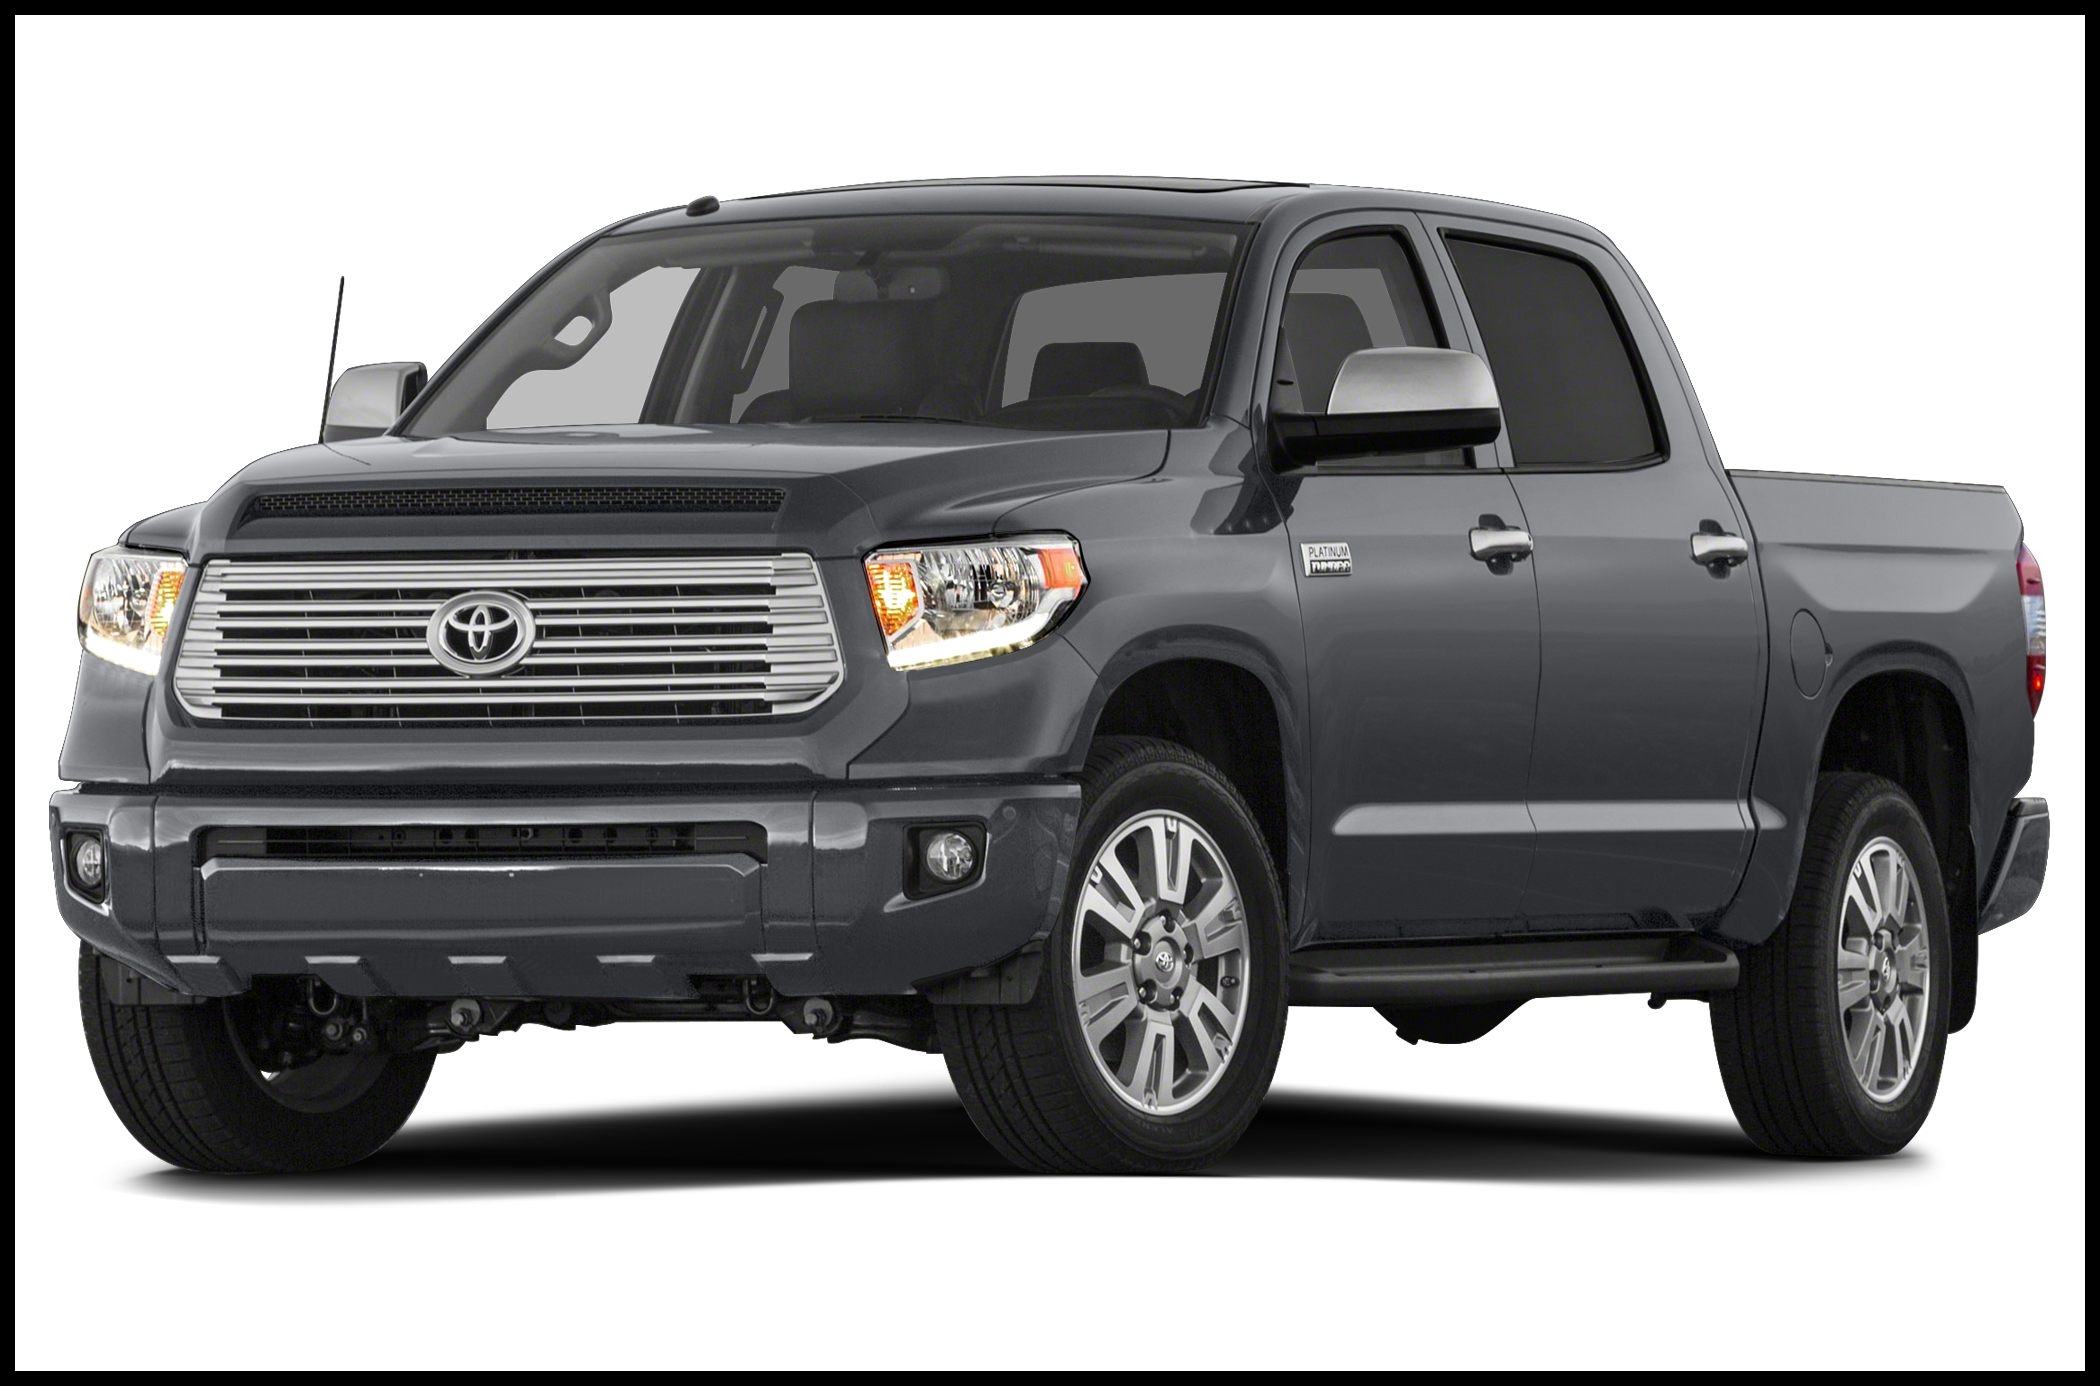 2014 Toyota Tundra Platinum 5 7L V8 4x2 Crew Max 5 6 ft box 145 7 in WB Pricing and Options